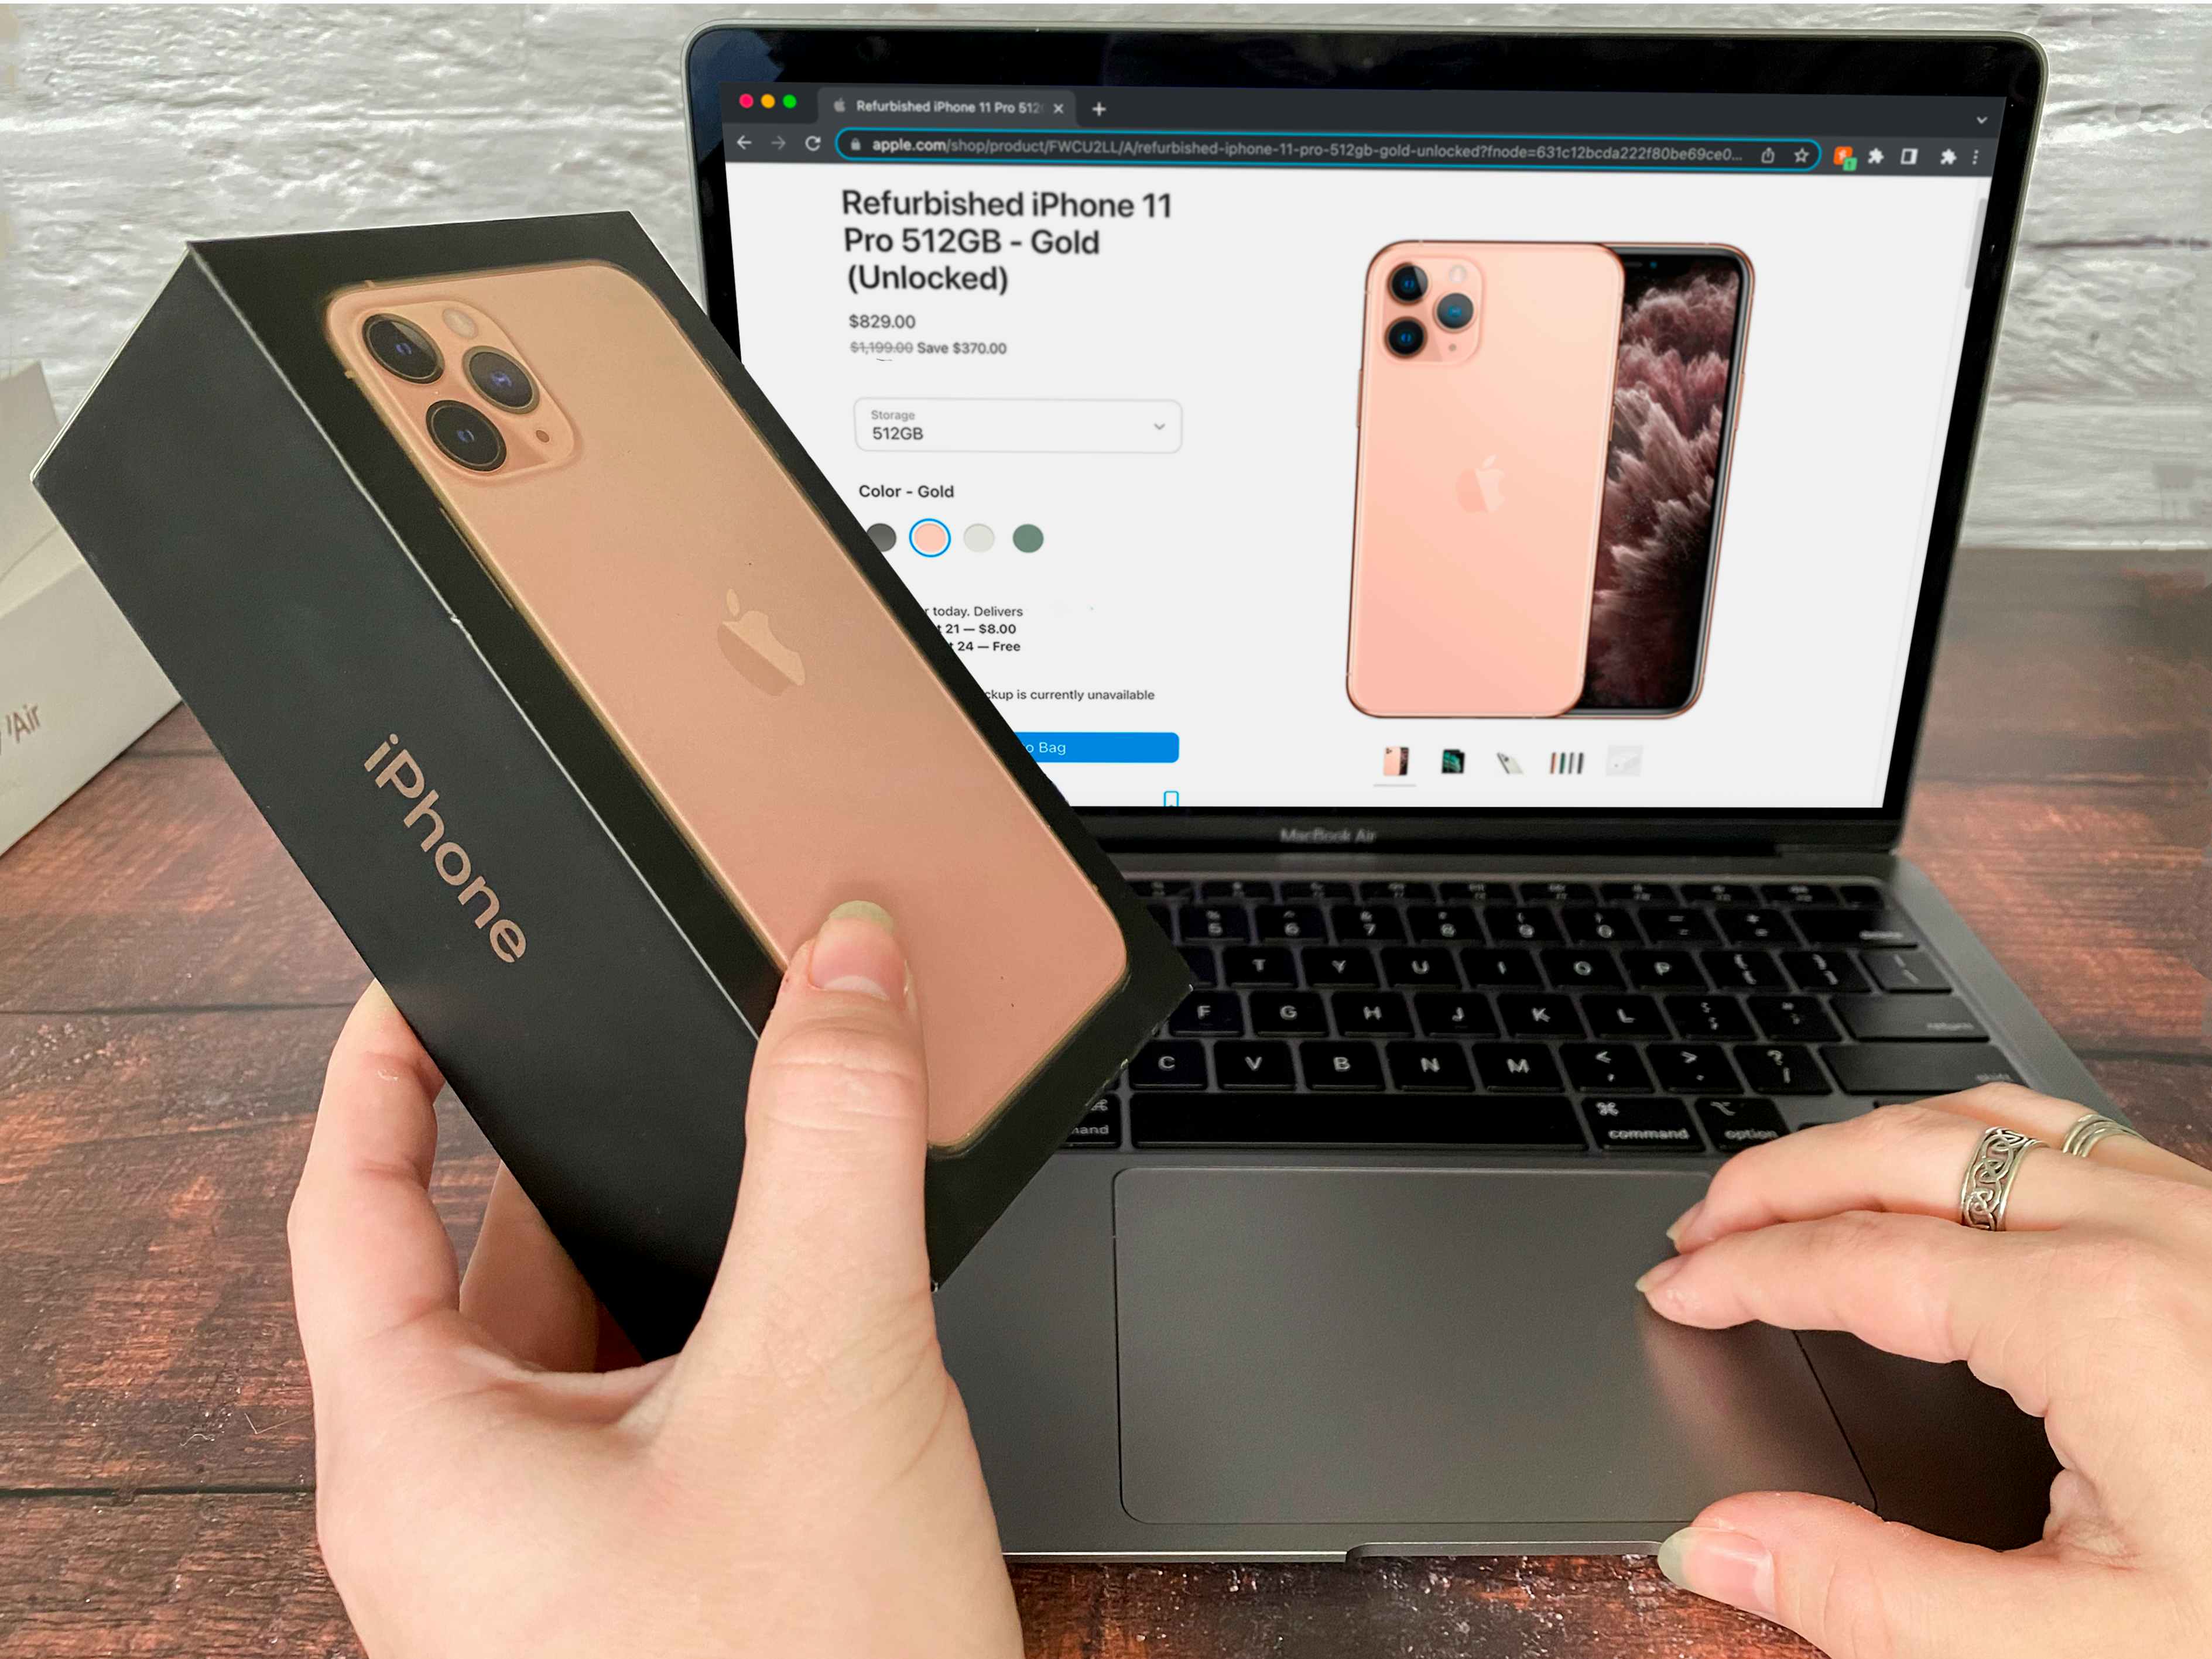 A person holding an iPhone 11 pro box and looking at the product on Apple's Refurbished products website.